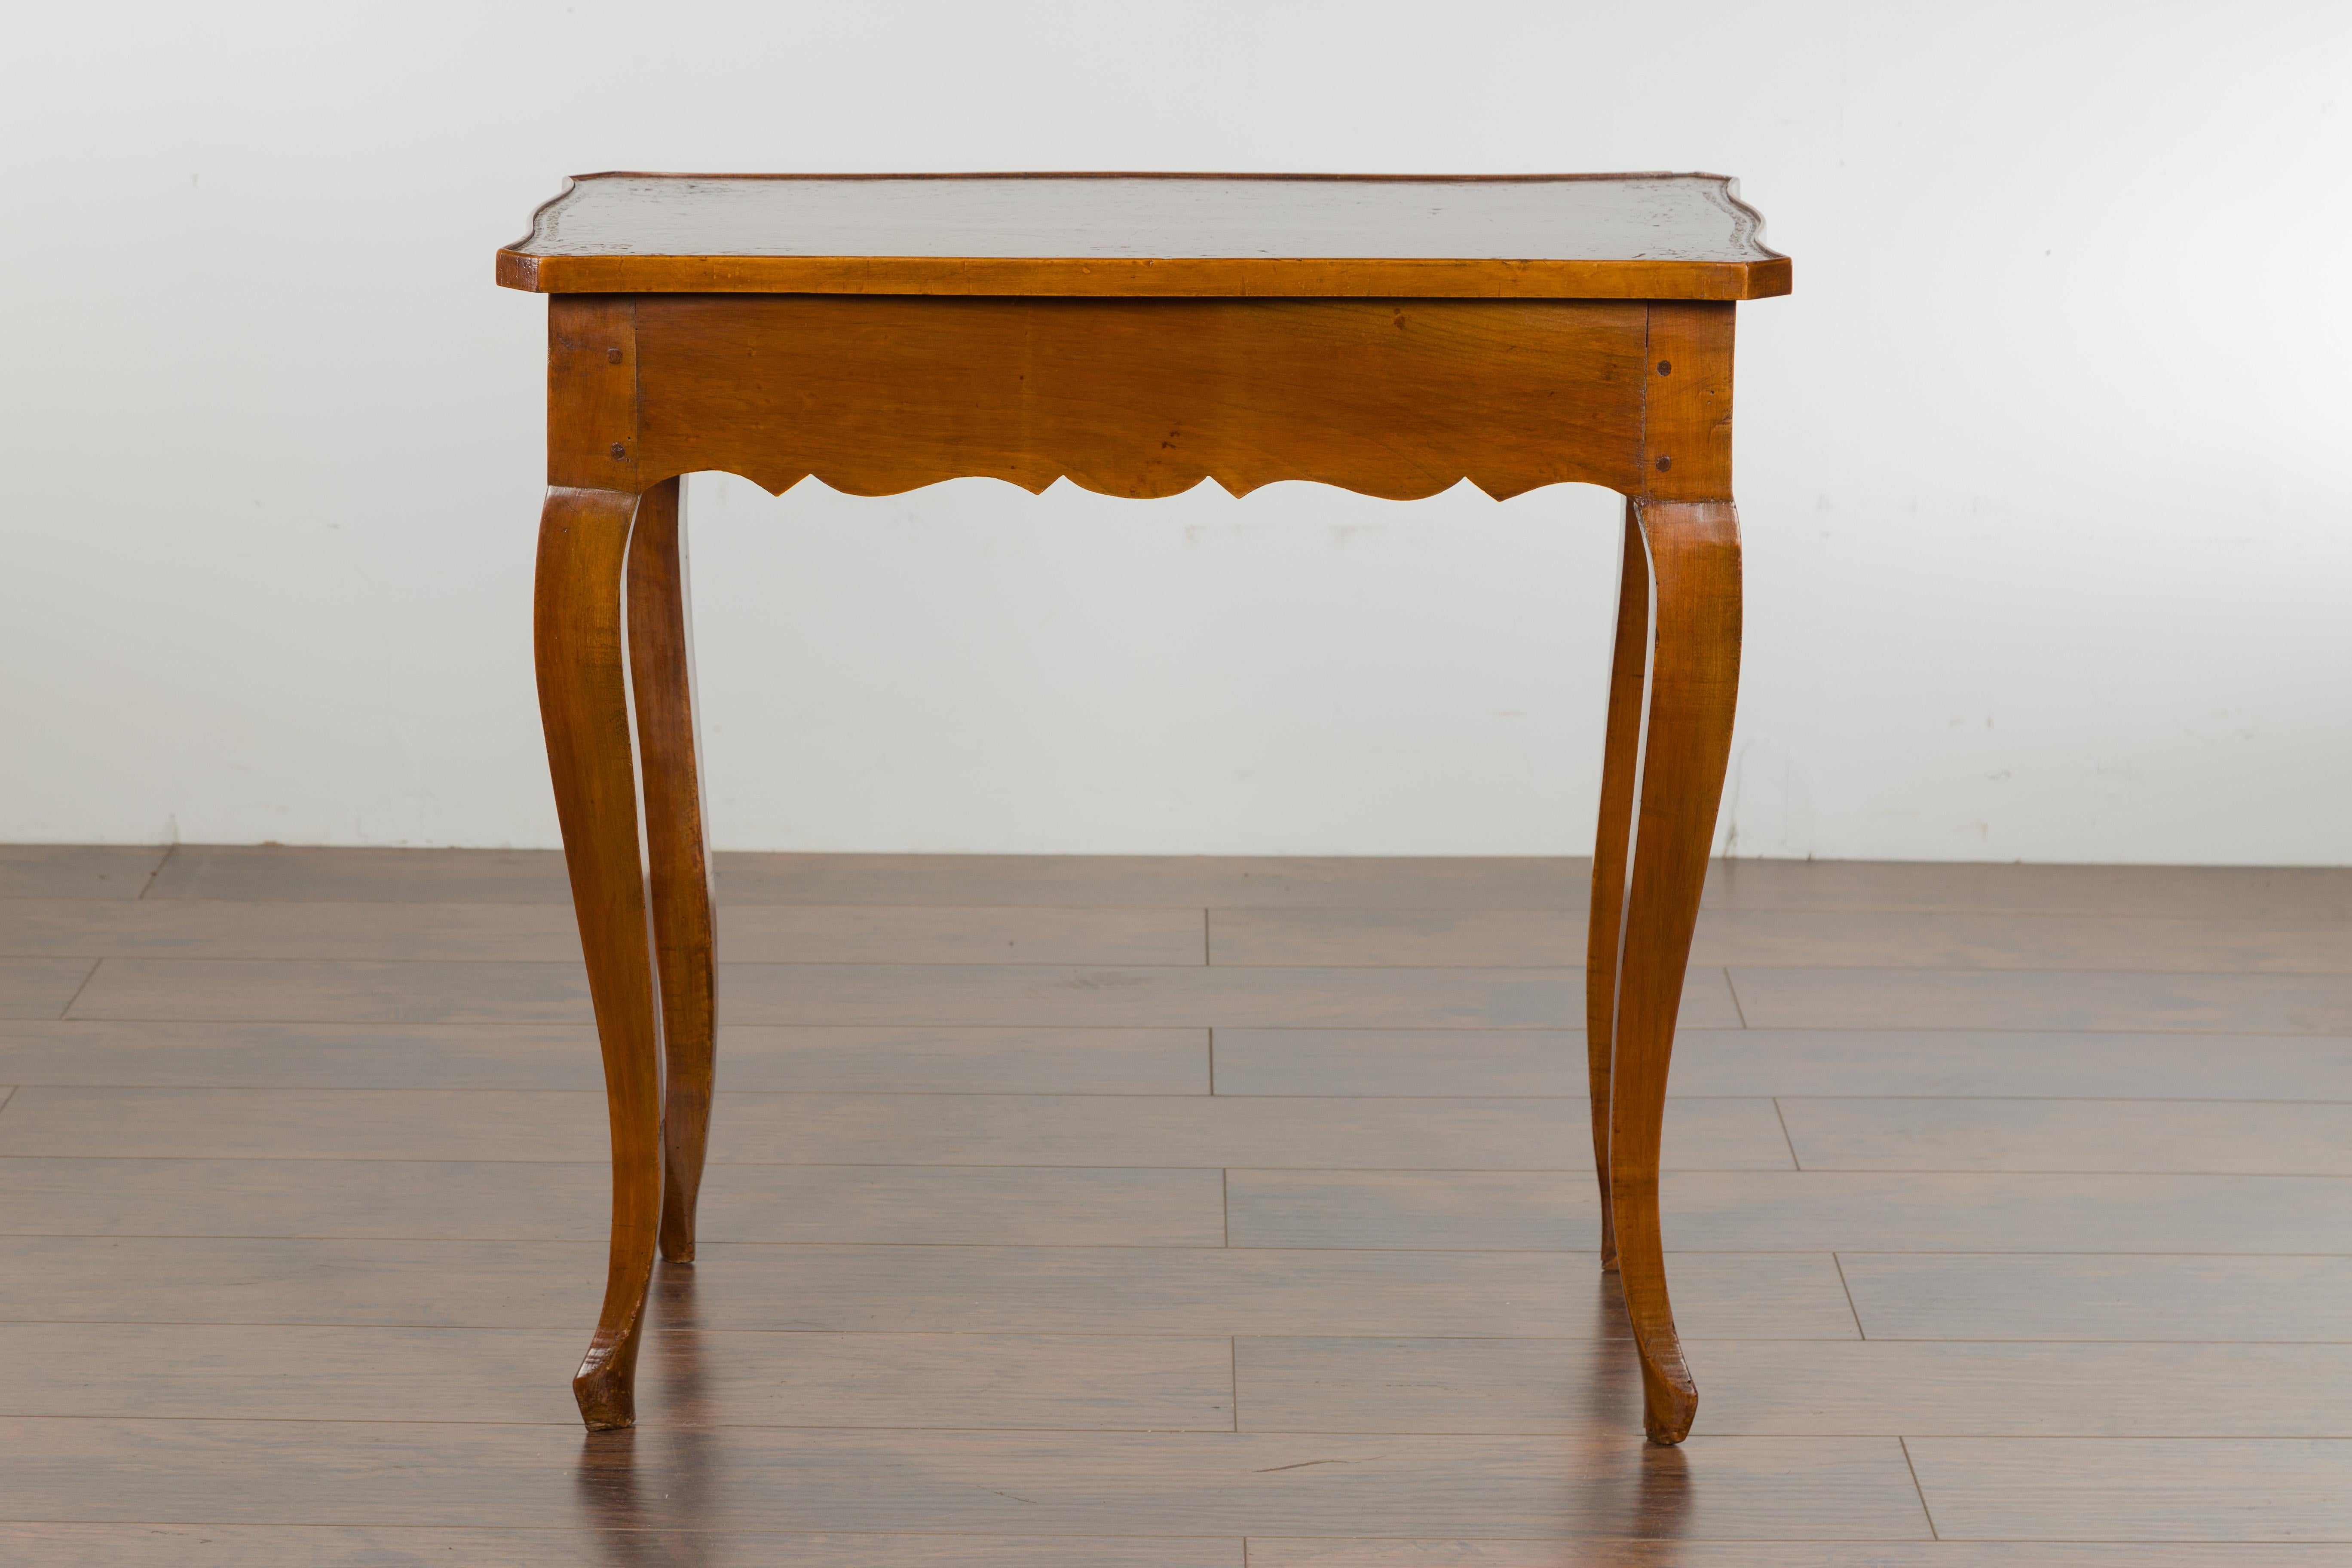 A French walnut side table from the 19th century, with leather top, long lateral drawer and cabriole legs. Created in France during the 19th century, this walnut side table features a rectangular shaped top with leather inset and canted corners,